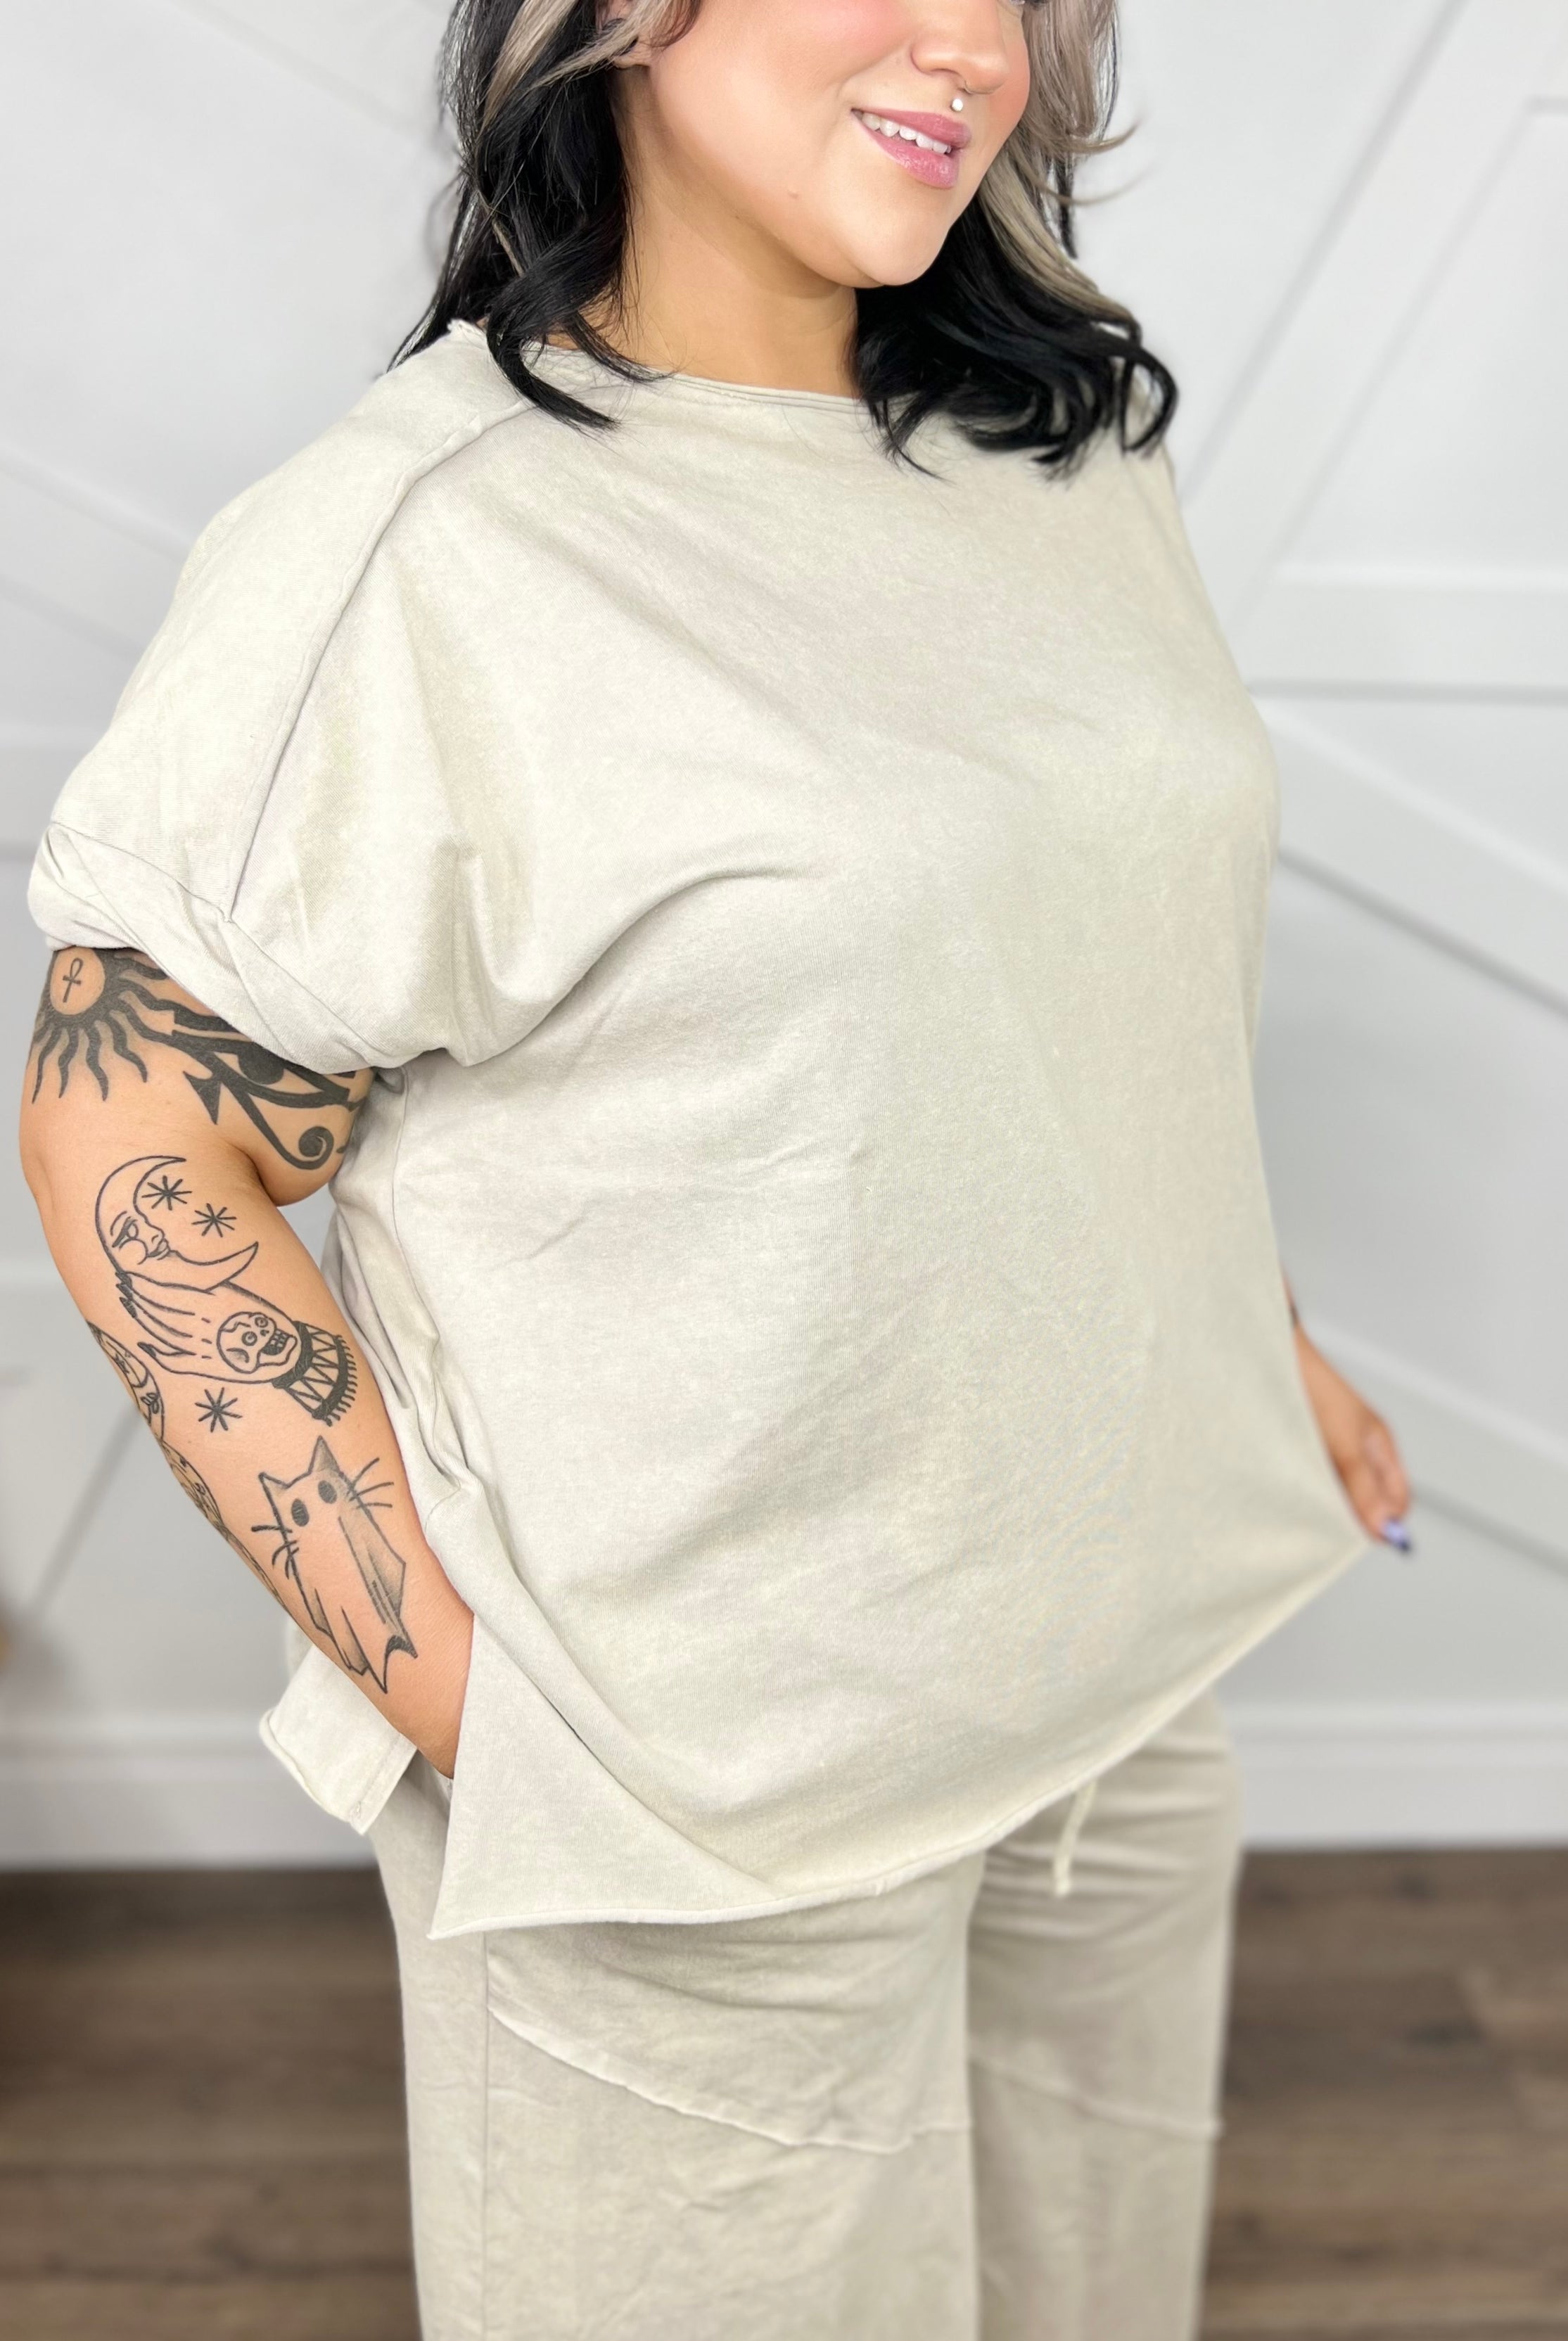 RESTOCK: Luxurious Comfort Top-110 Short Sleeve Top-Oddi-Heathered Boho Boutique, Women's Fashion and Accessories in Palmetto, FL